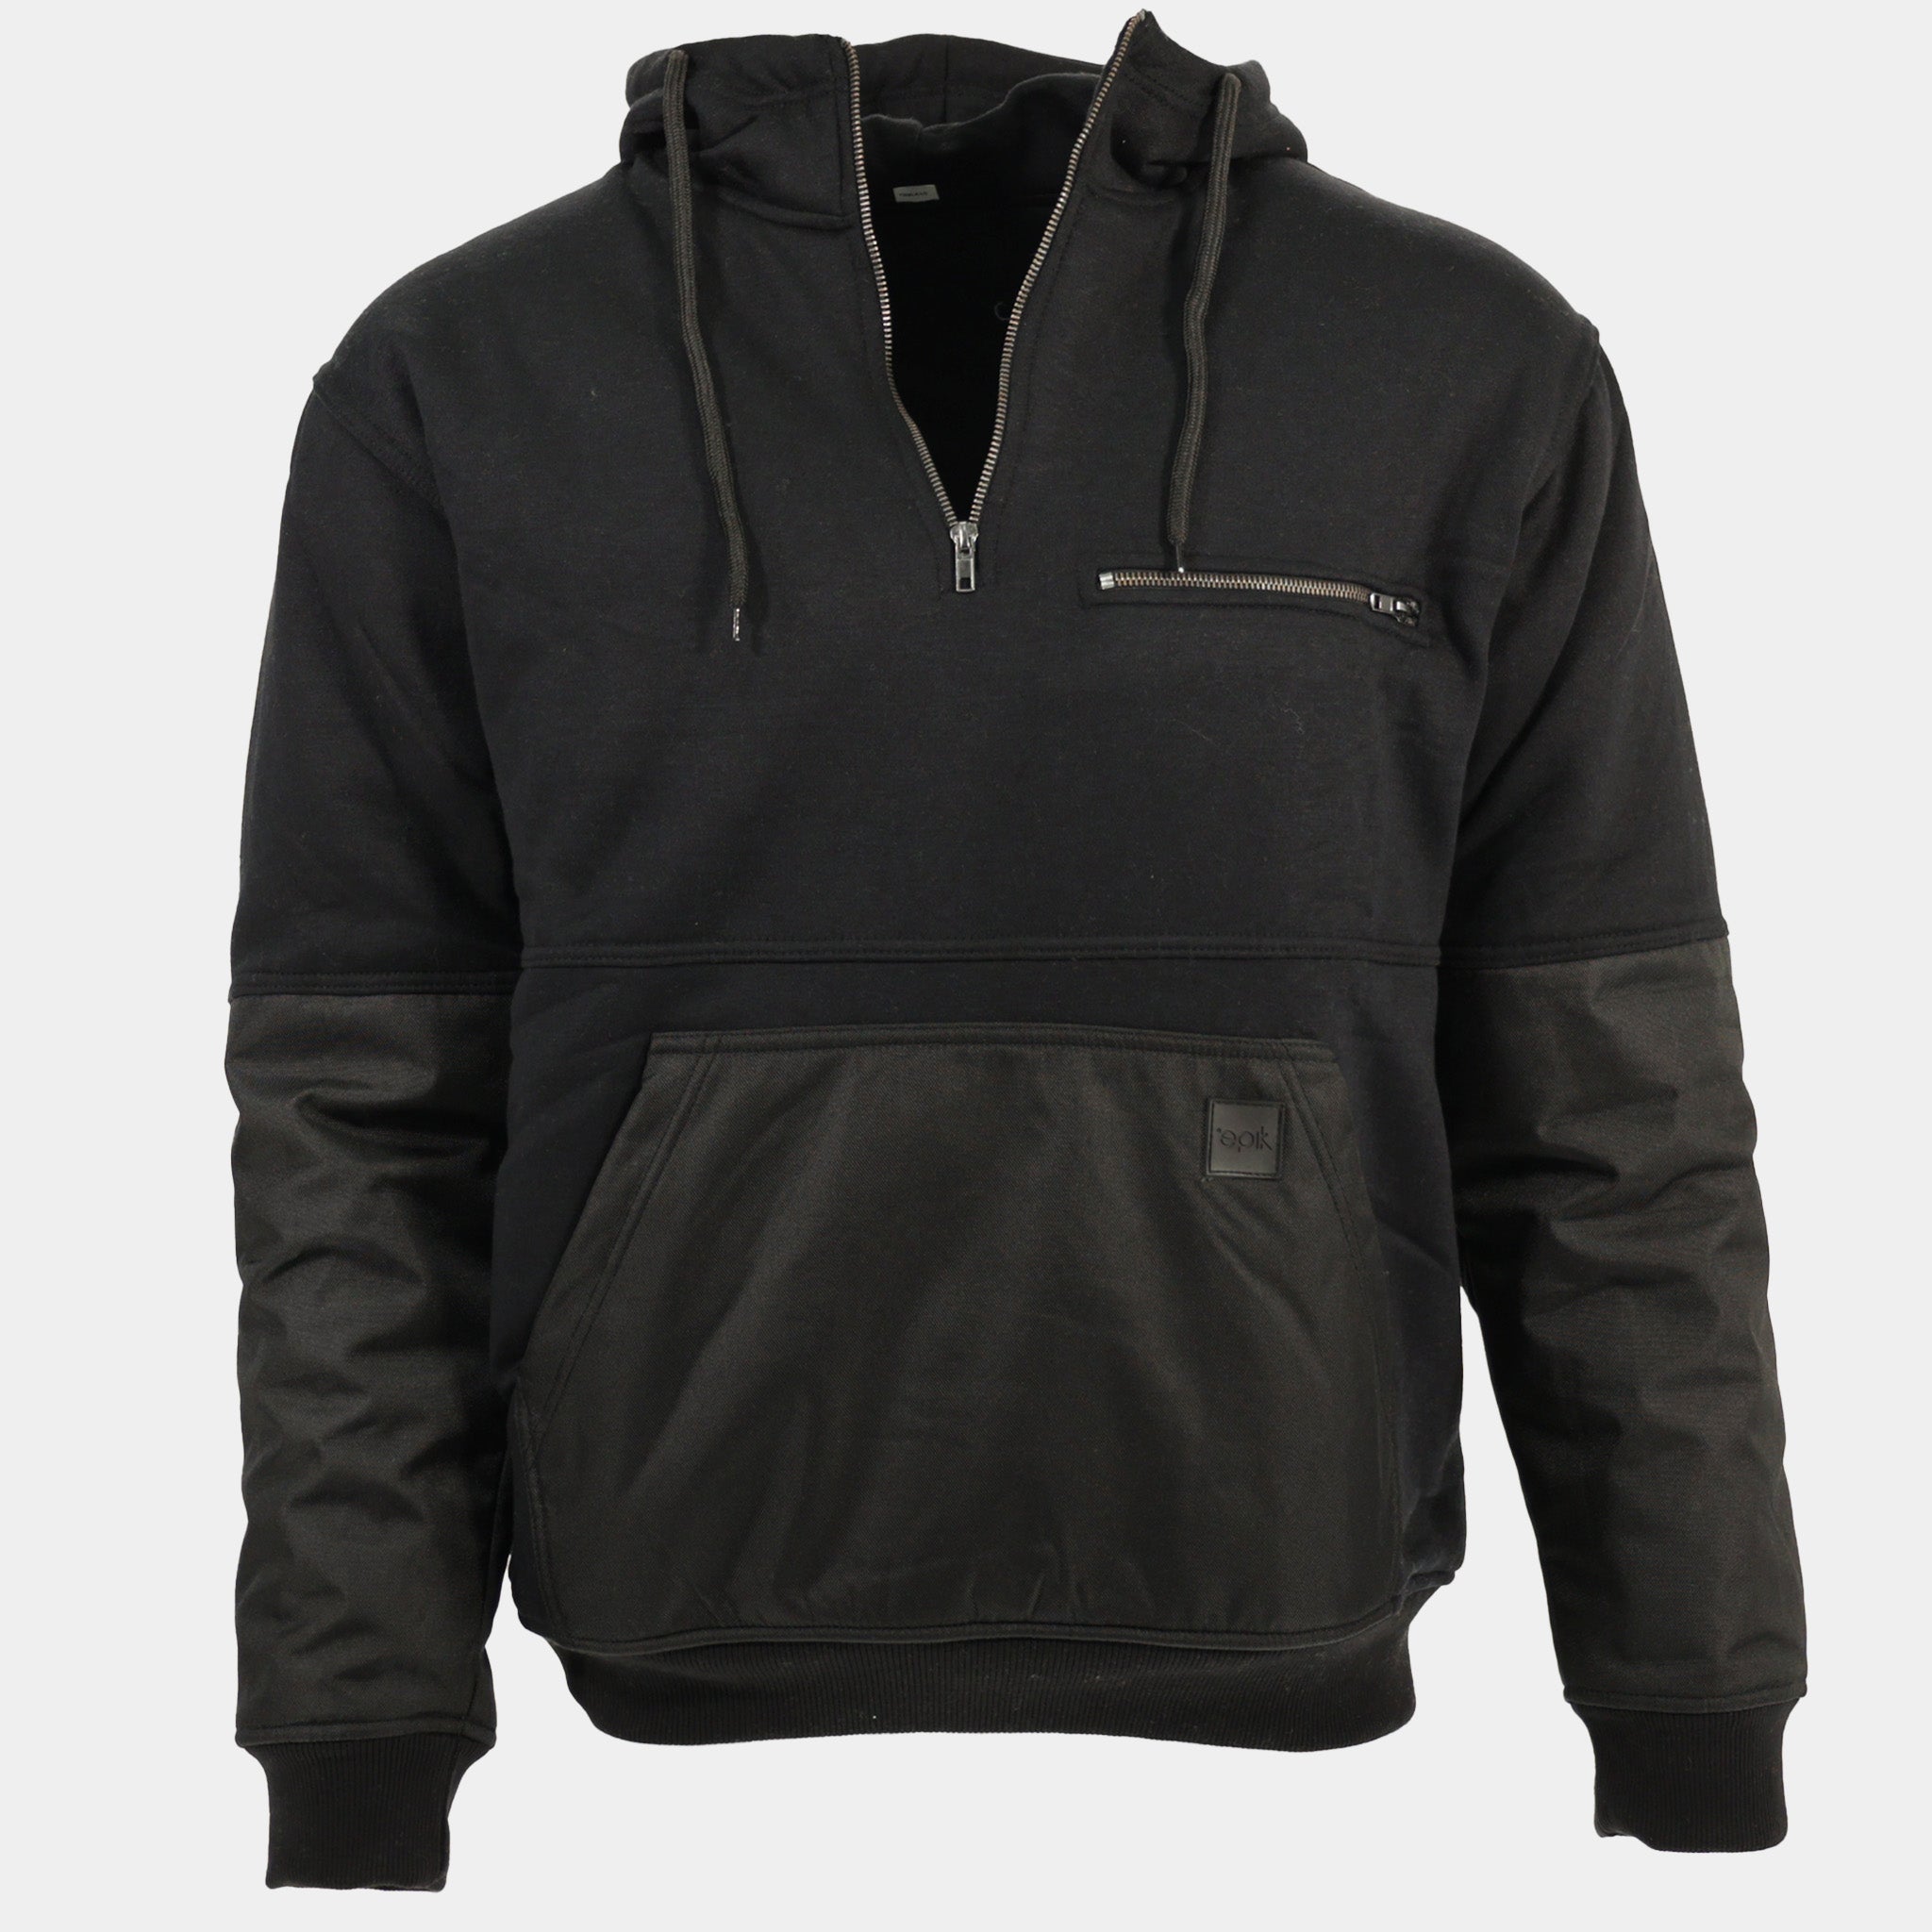 Peak Pro Pull-Over Hoodie - Compact Layers, Durable Black